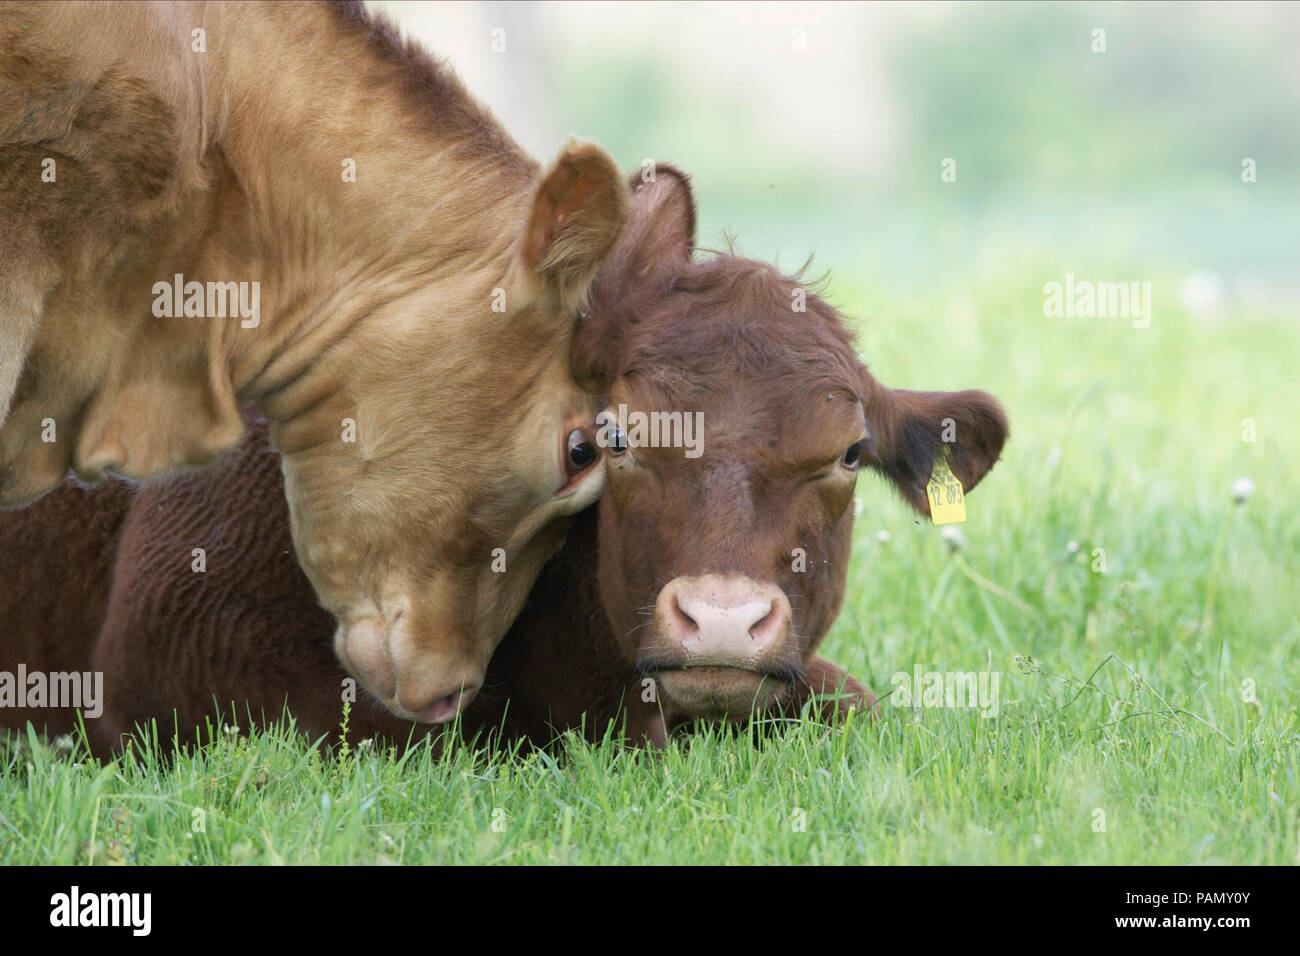 German Angus Cattle. Two calves smoothing on a pasture. Germany Stock Photo